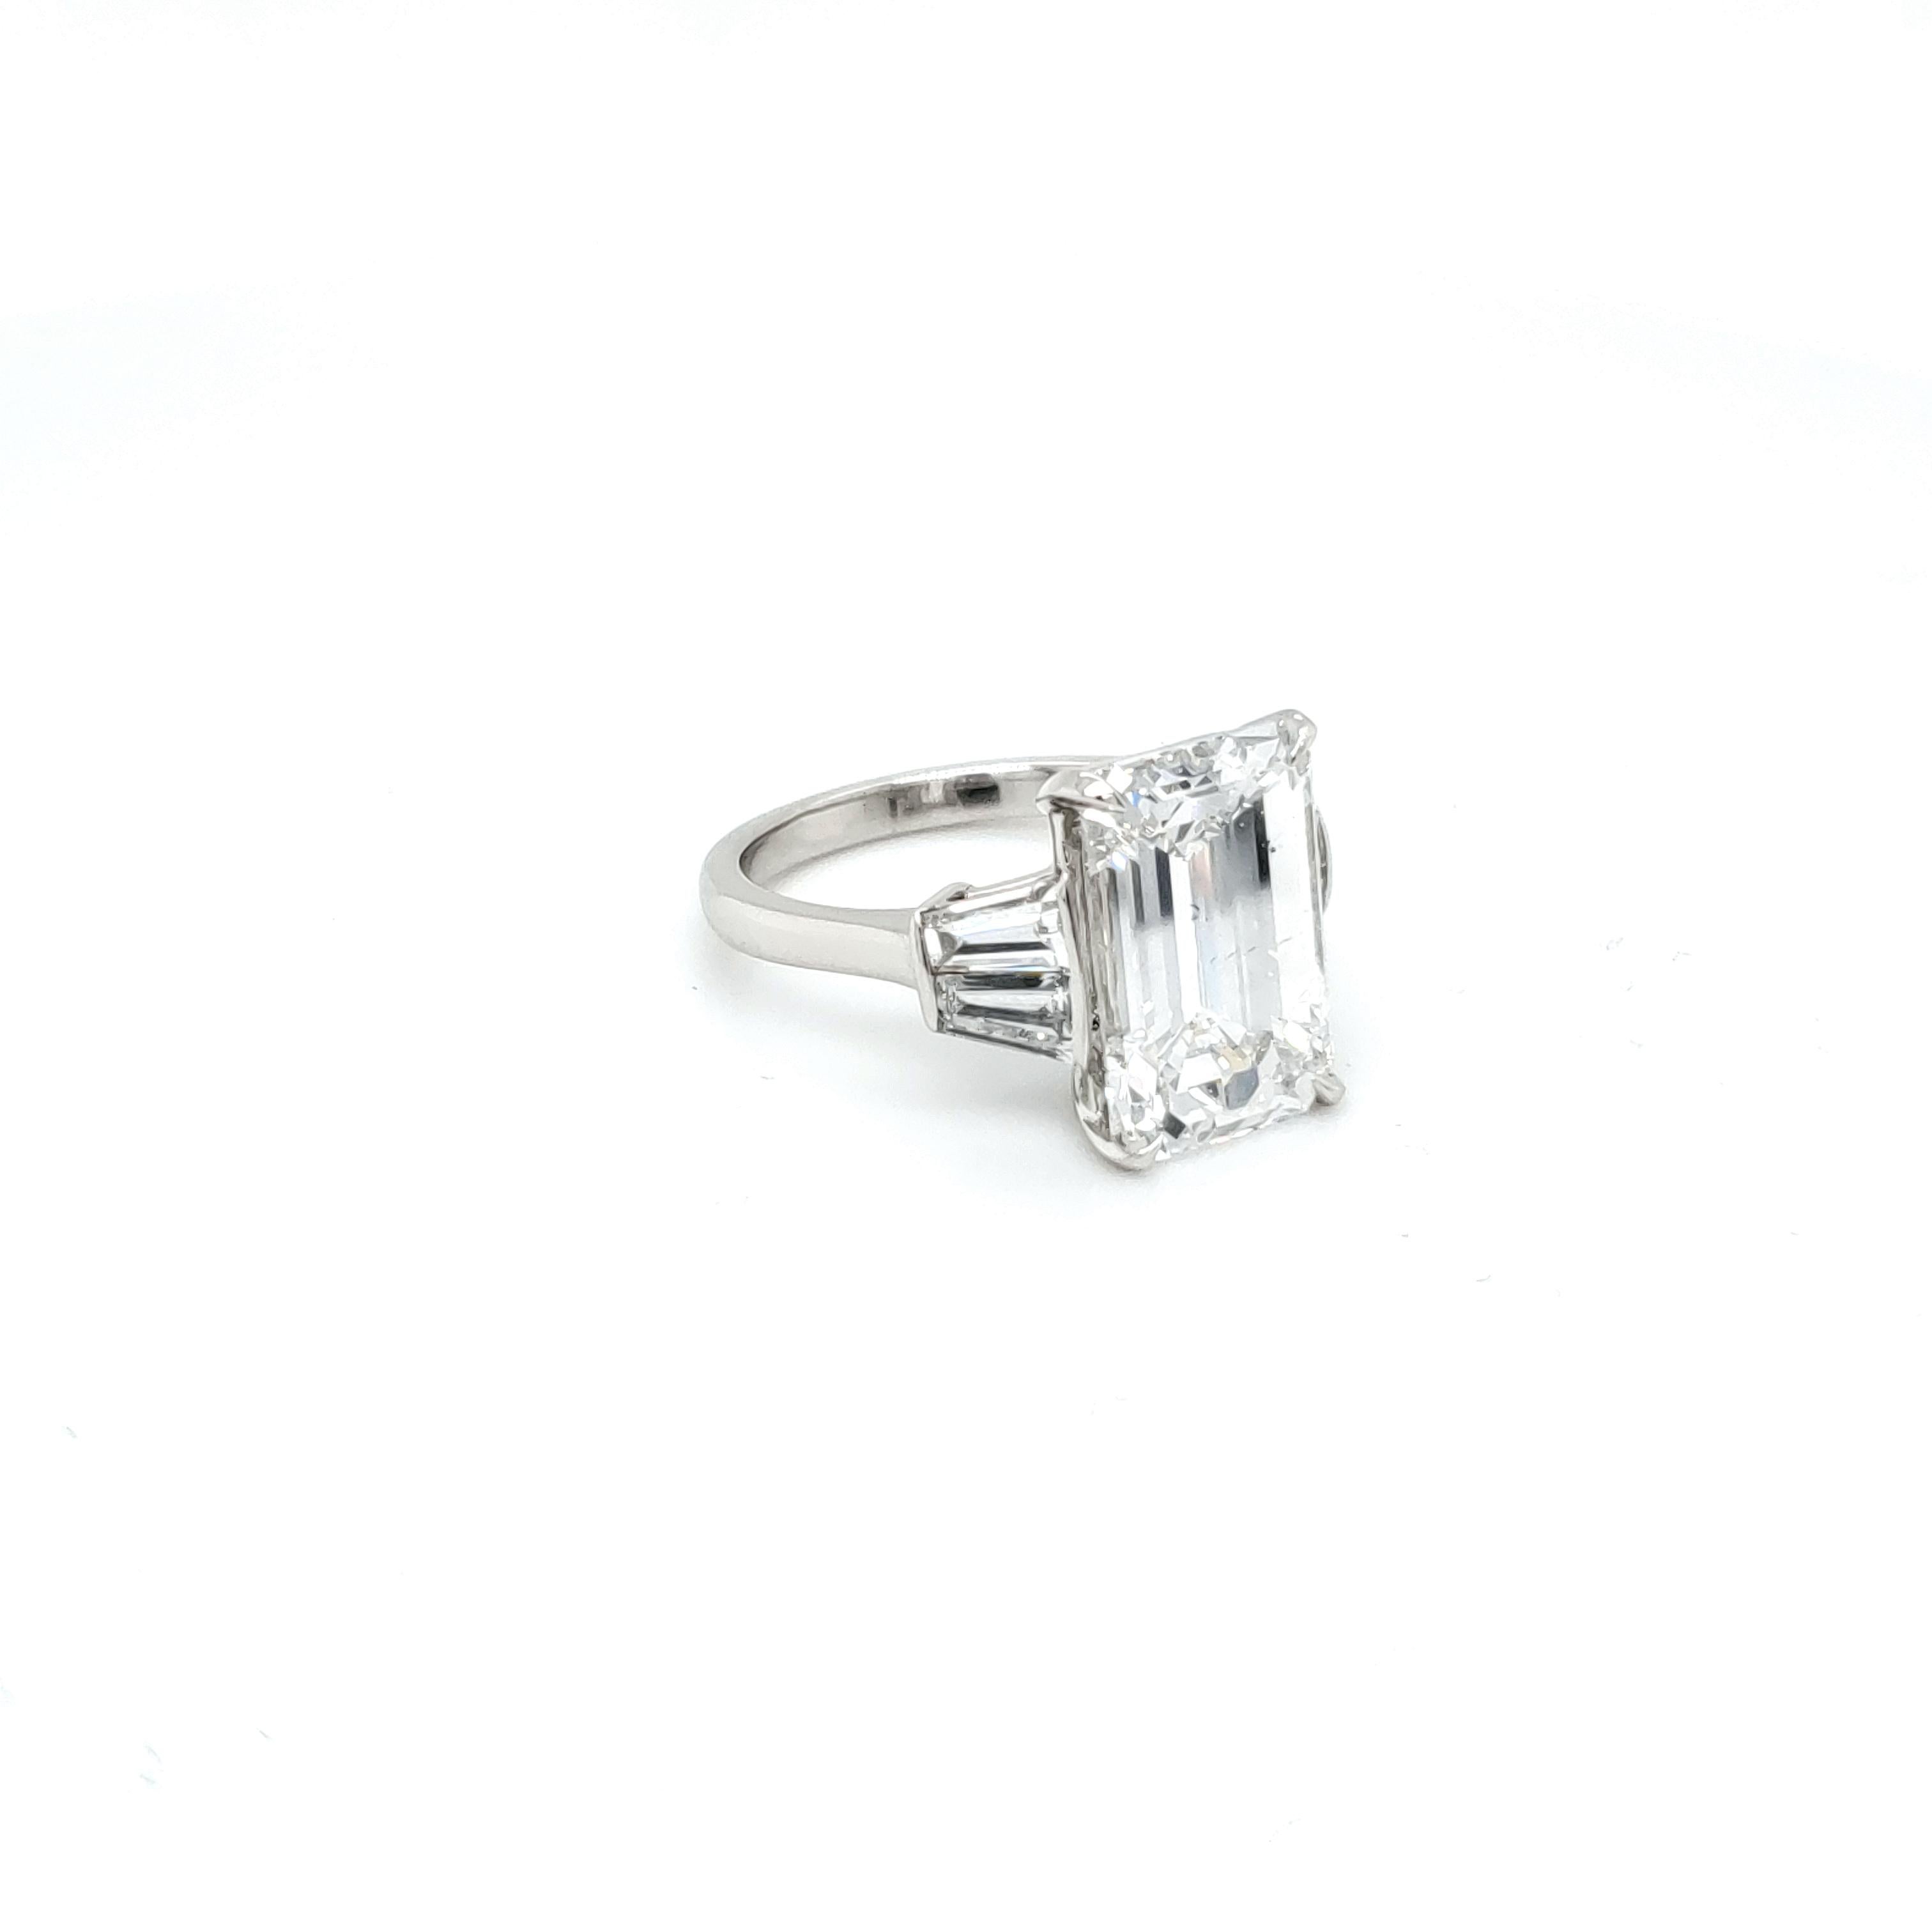 GIA Certified 6.03 carat Diamond with an emerald cut set in four pointed prongs. The center diamond is accompanied by a GIA certificate, diamond report. The GIA report number is 5202555415. The diamond is F color and SI-1 clarity. VERY white